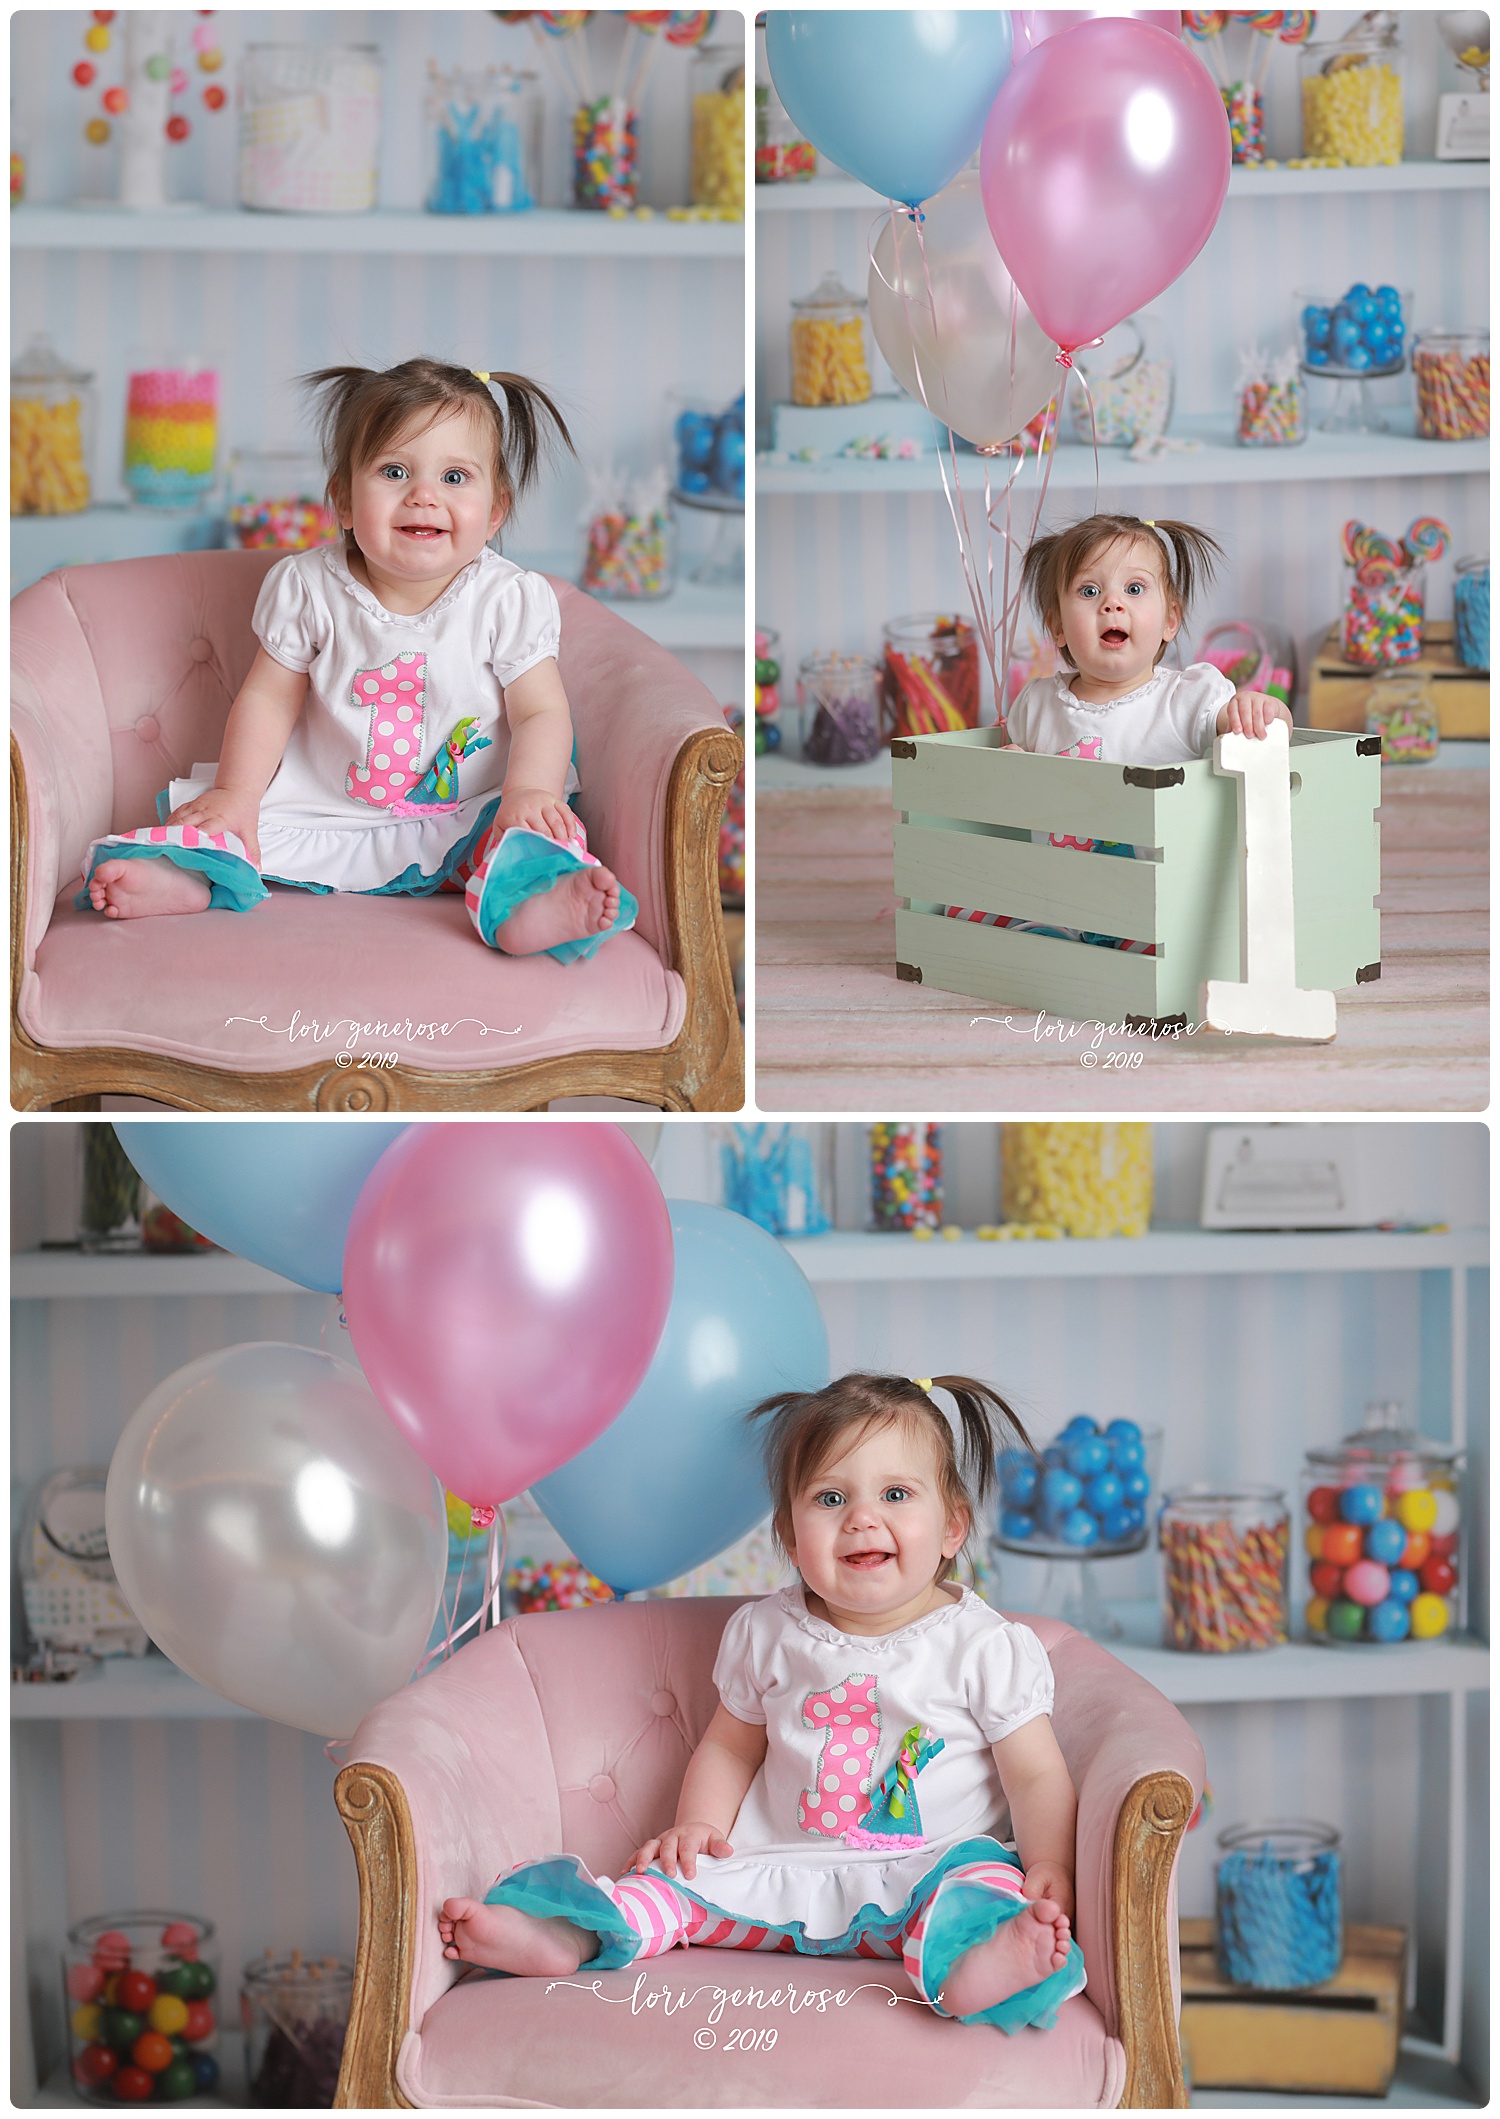 Her outfit worked perfectly with my candy shop backdrop- add some balloons and her sweet little face and PERFECTION! Sweet as sugar!